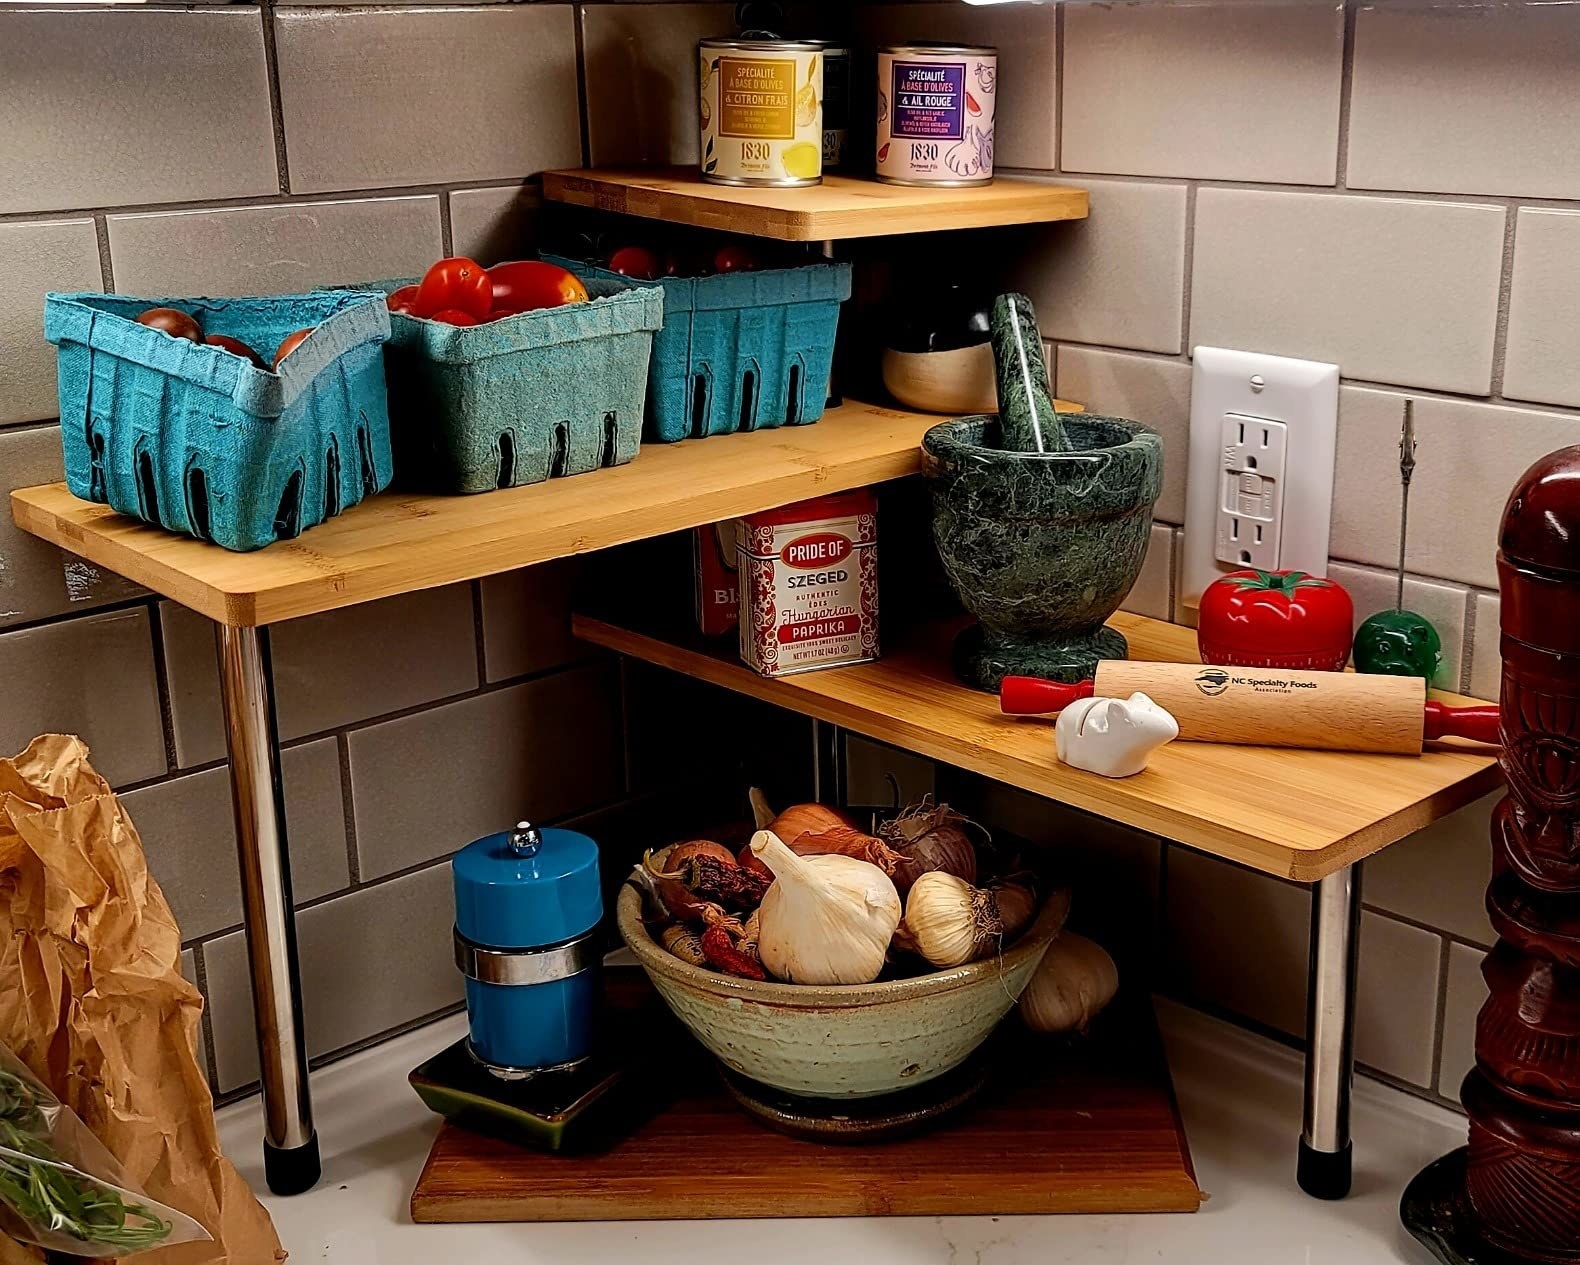 A reviewer home with the shelf and cooking supplies in various colors and sizes